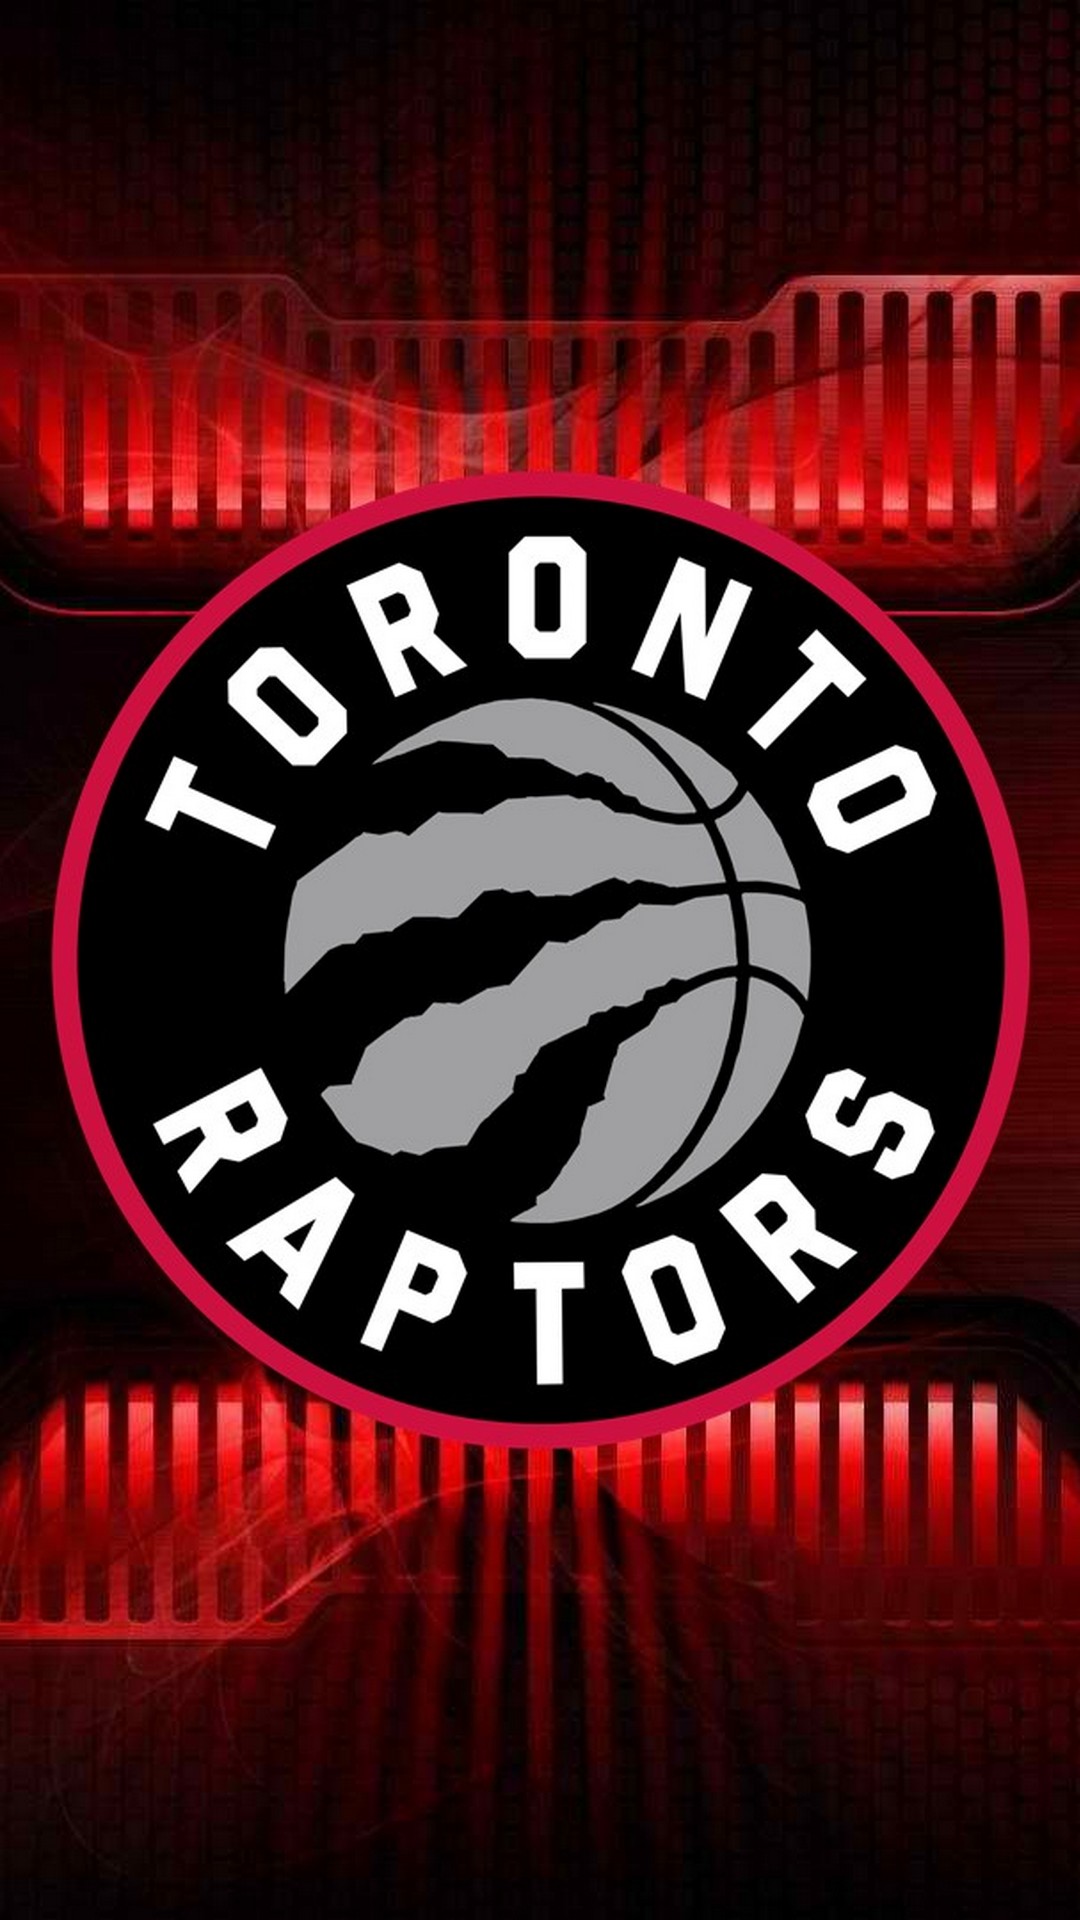 iPhone Wallpaper HD Toronto Raptors With high-resolution 1080X1920 pixel. You can use this wallpaper for your iPhone 5, 6, 7, 8, X, XS, XR backgrounds, Mobile Screensaver, or iPad Lock Screen